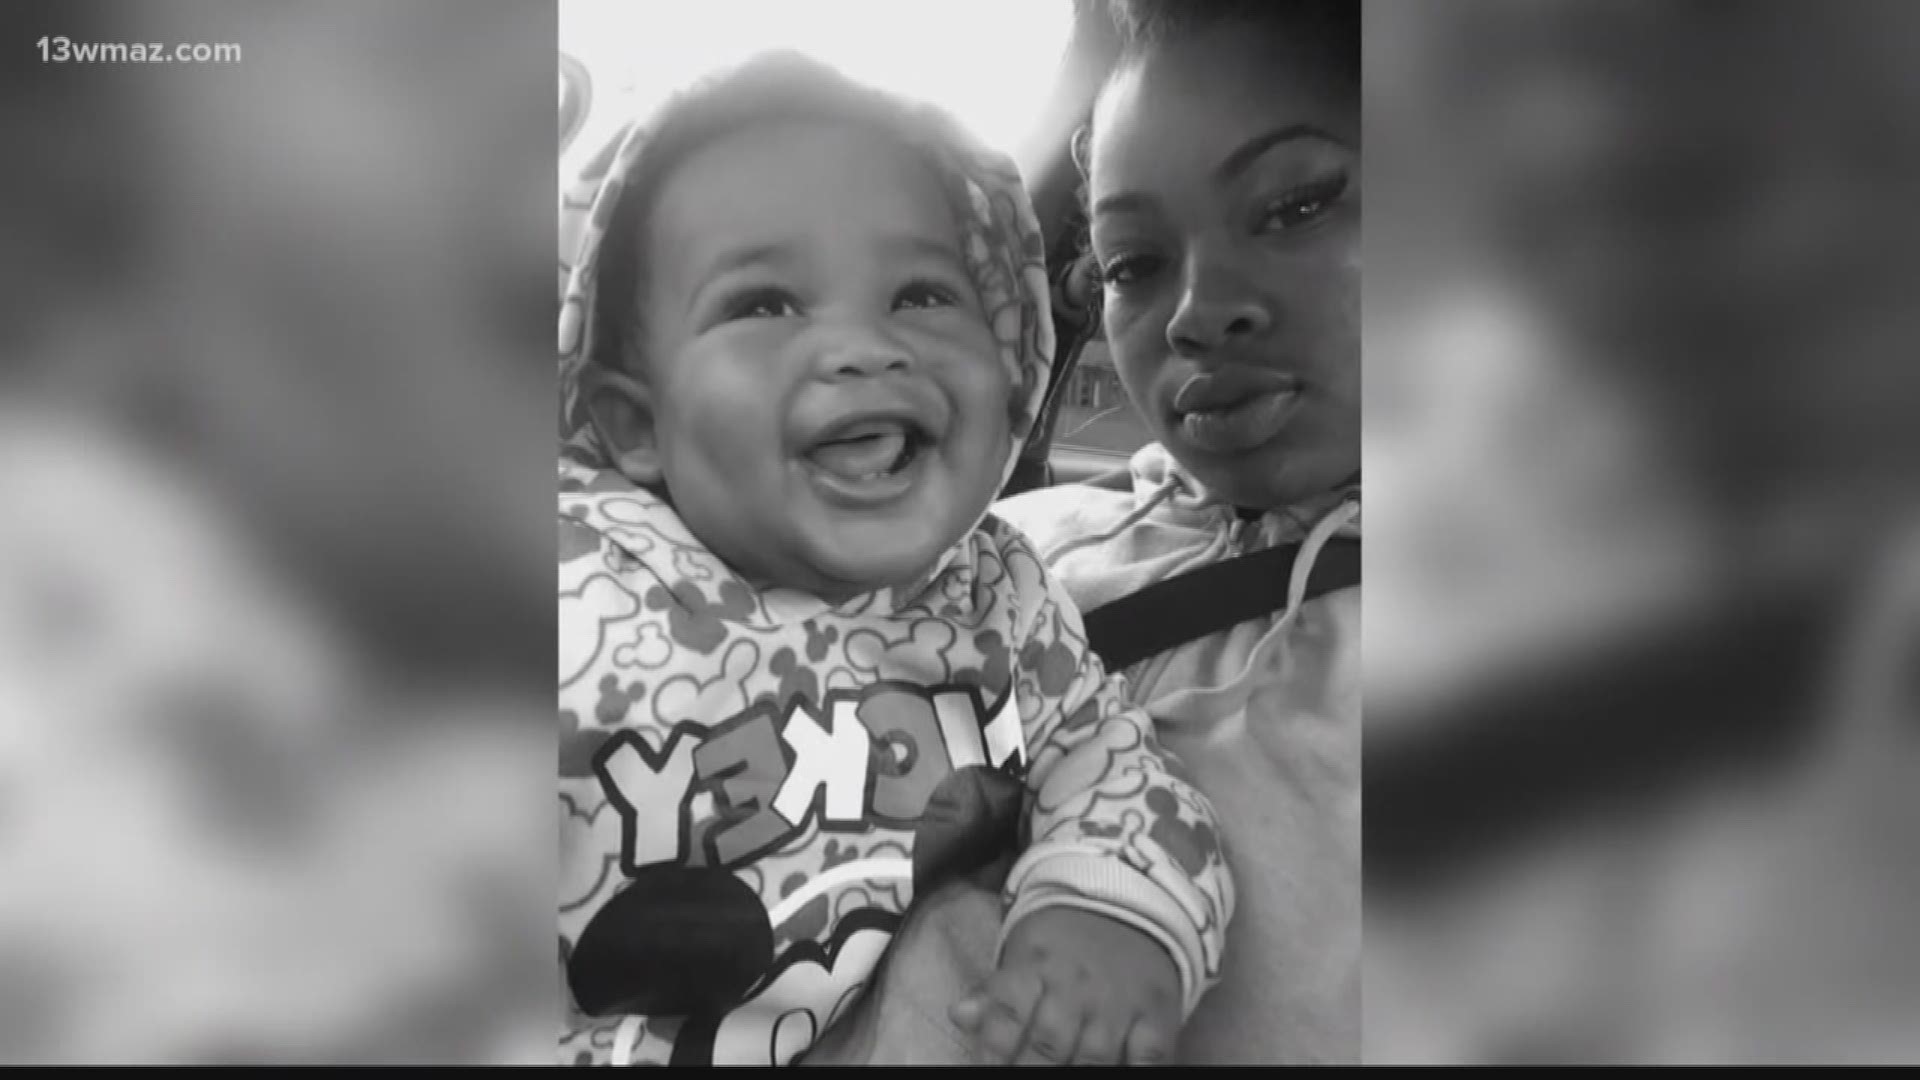 Tynesha Hammonds, 20, was shot and killed on Sunday and leaves behind her son, Amari Morgan, who is just months old.